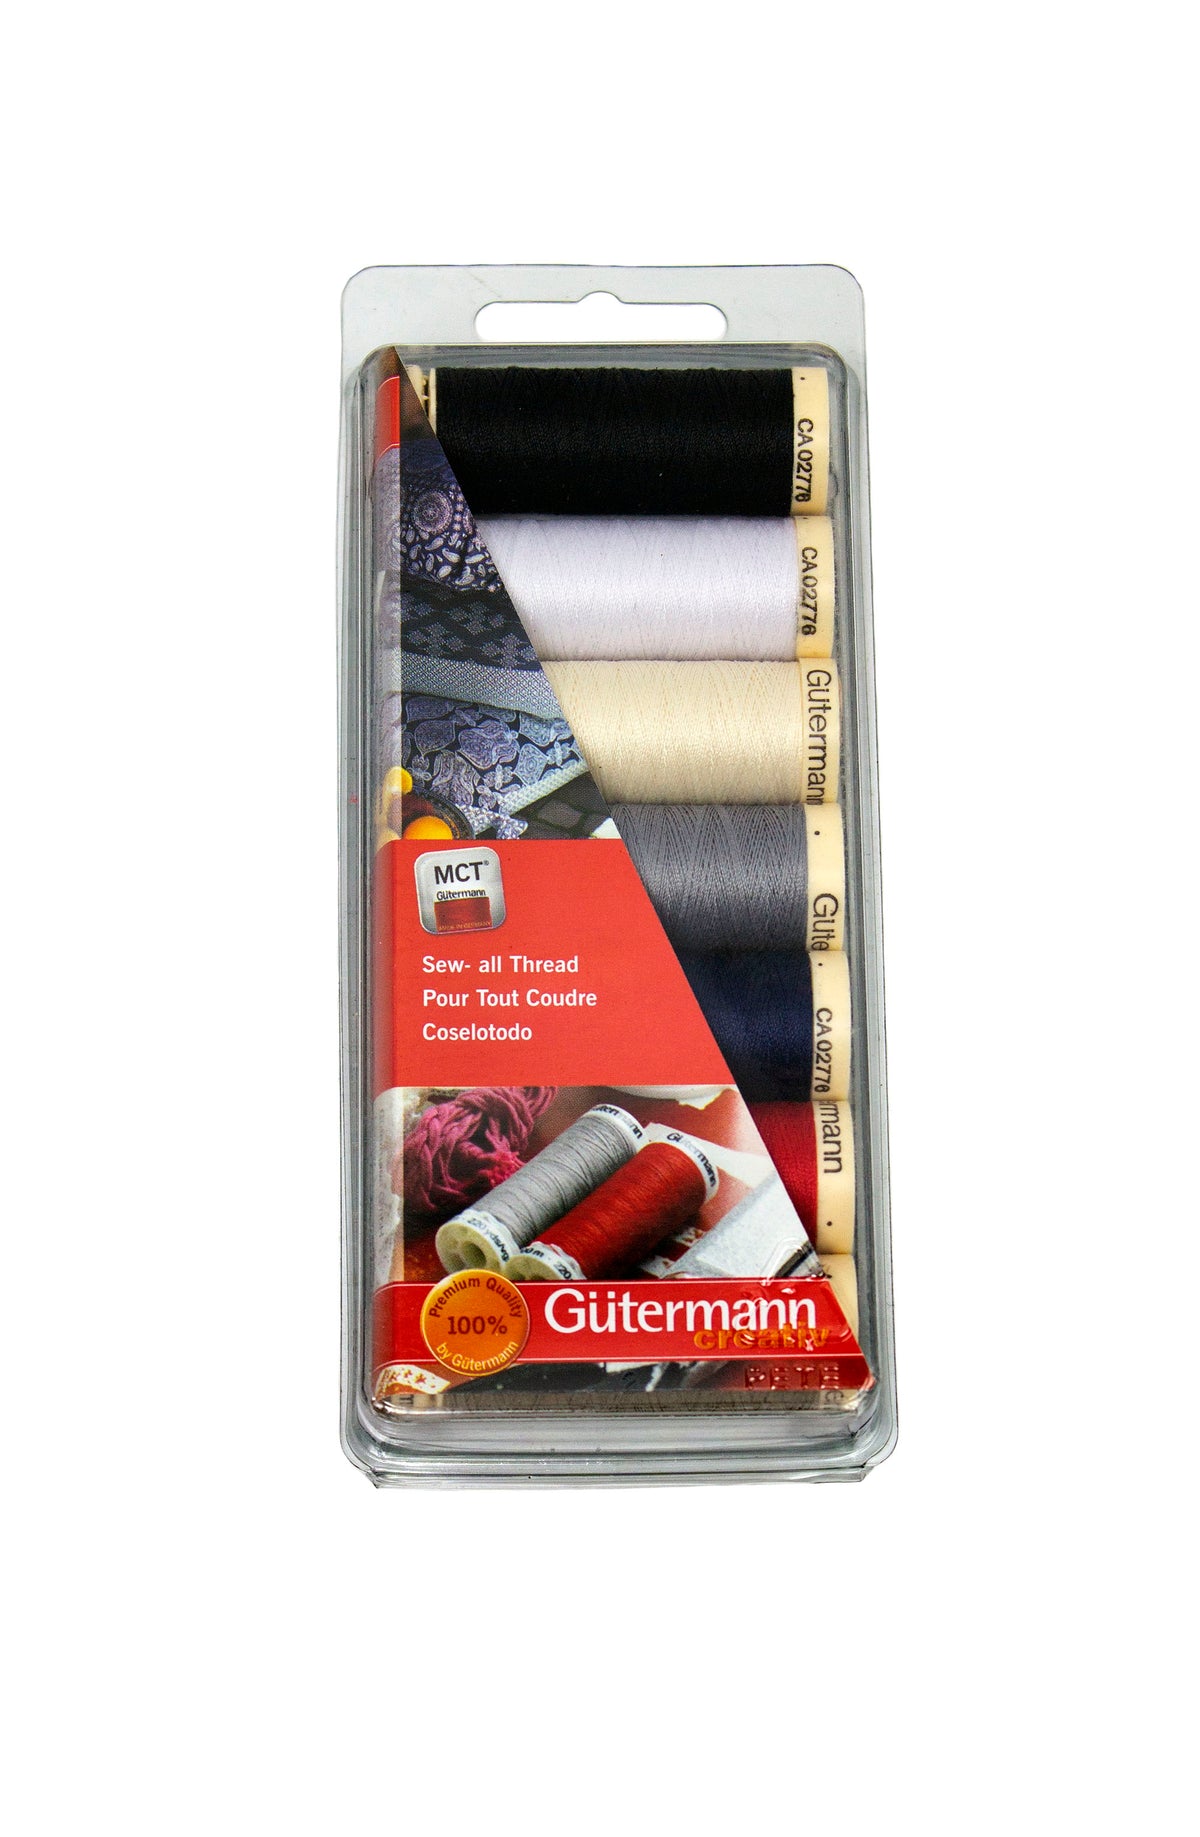 Gutermann Sew All Polyester Thread - Seven Spools Basic Colors - 110 Yards Each - Humboldt Haberdashery